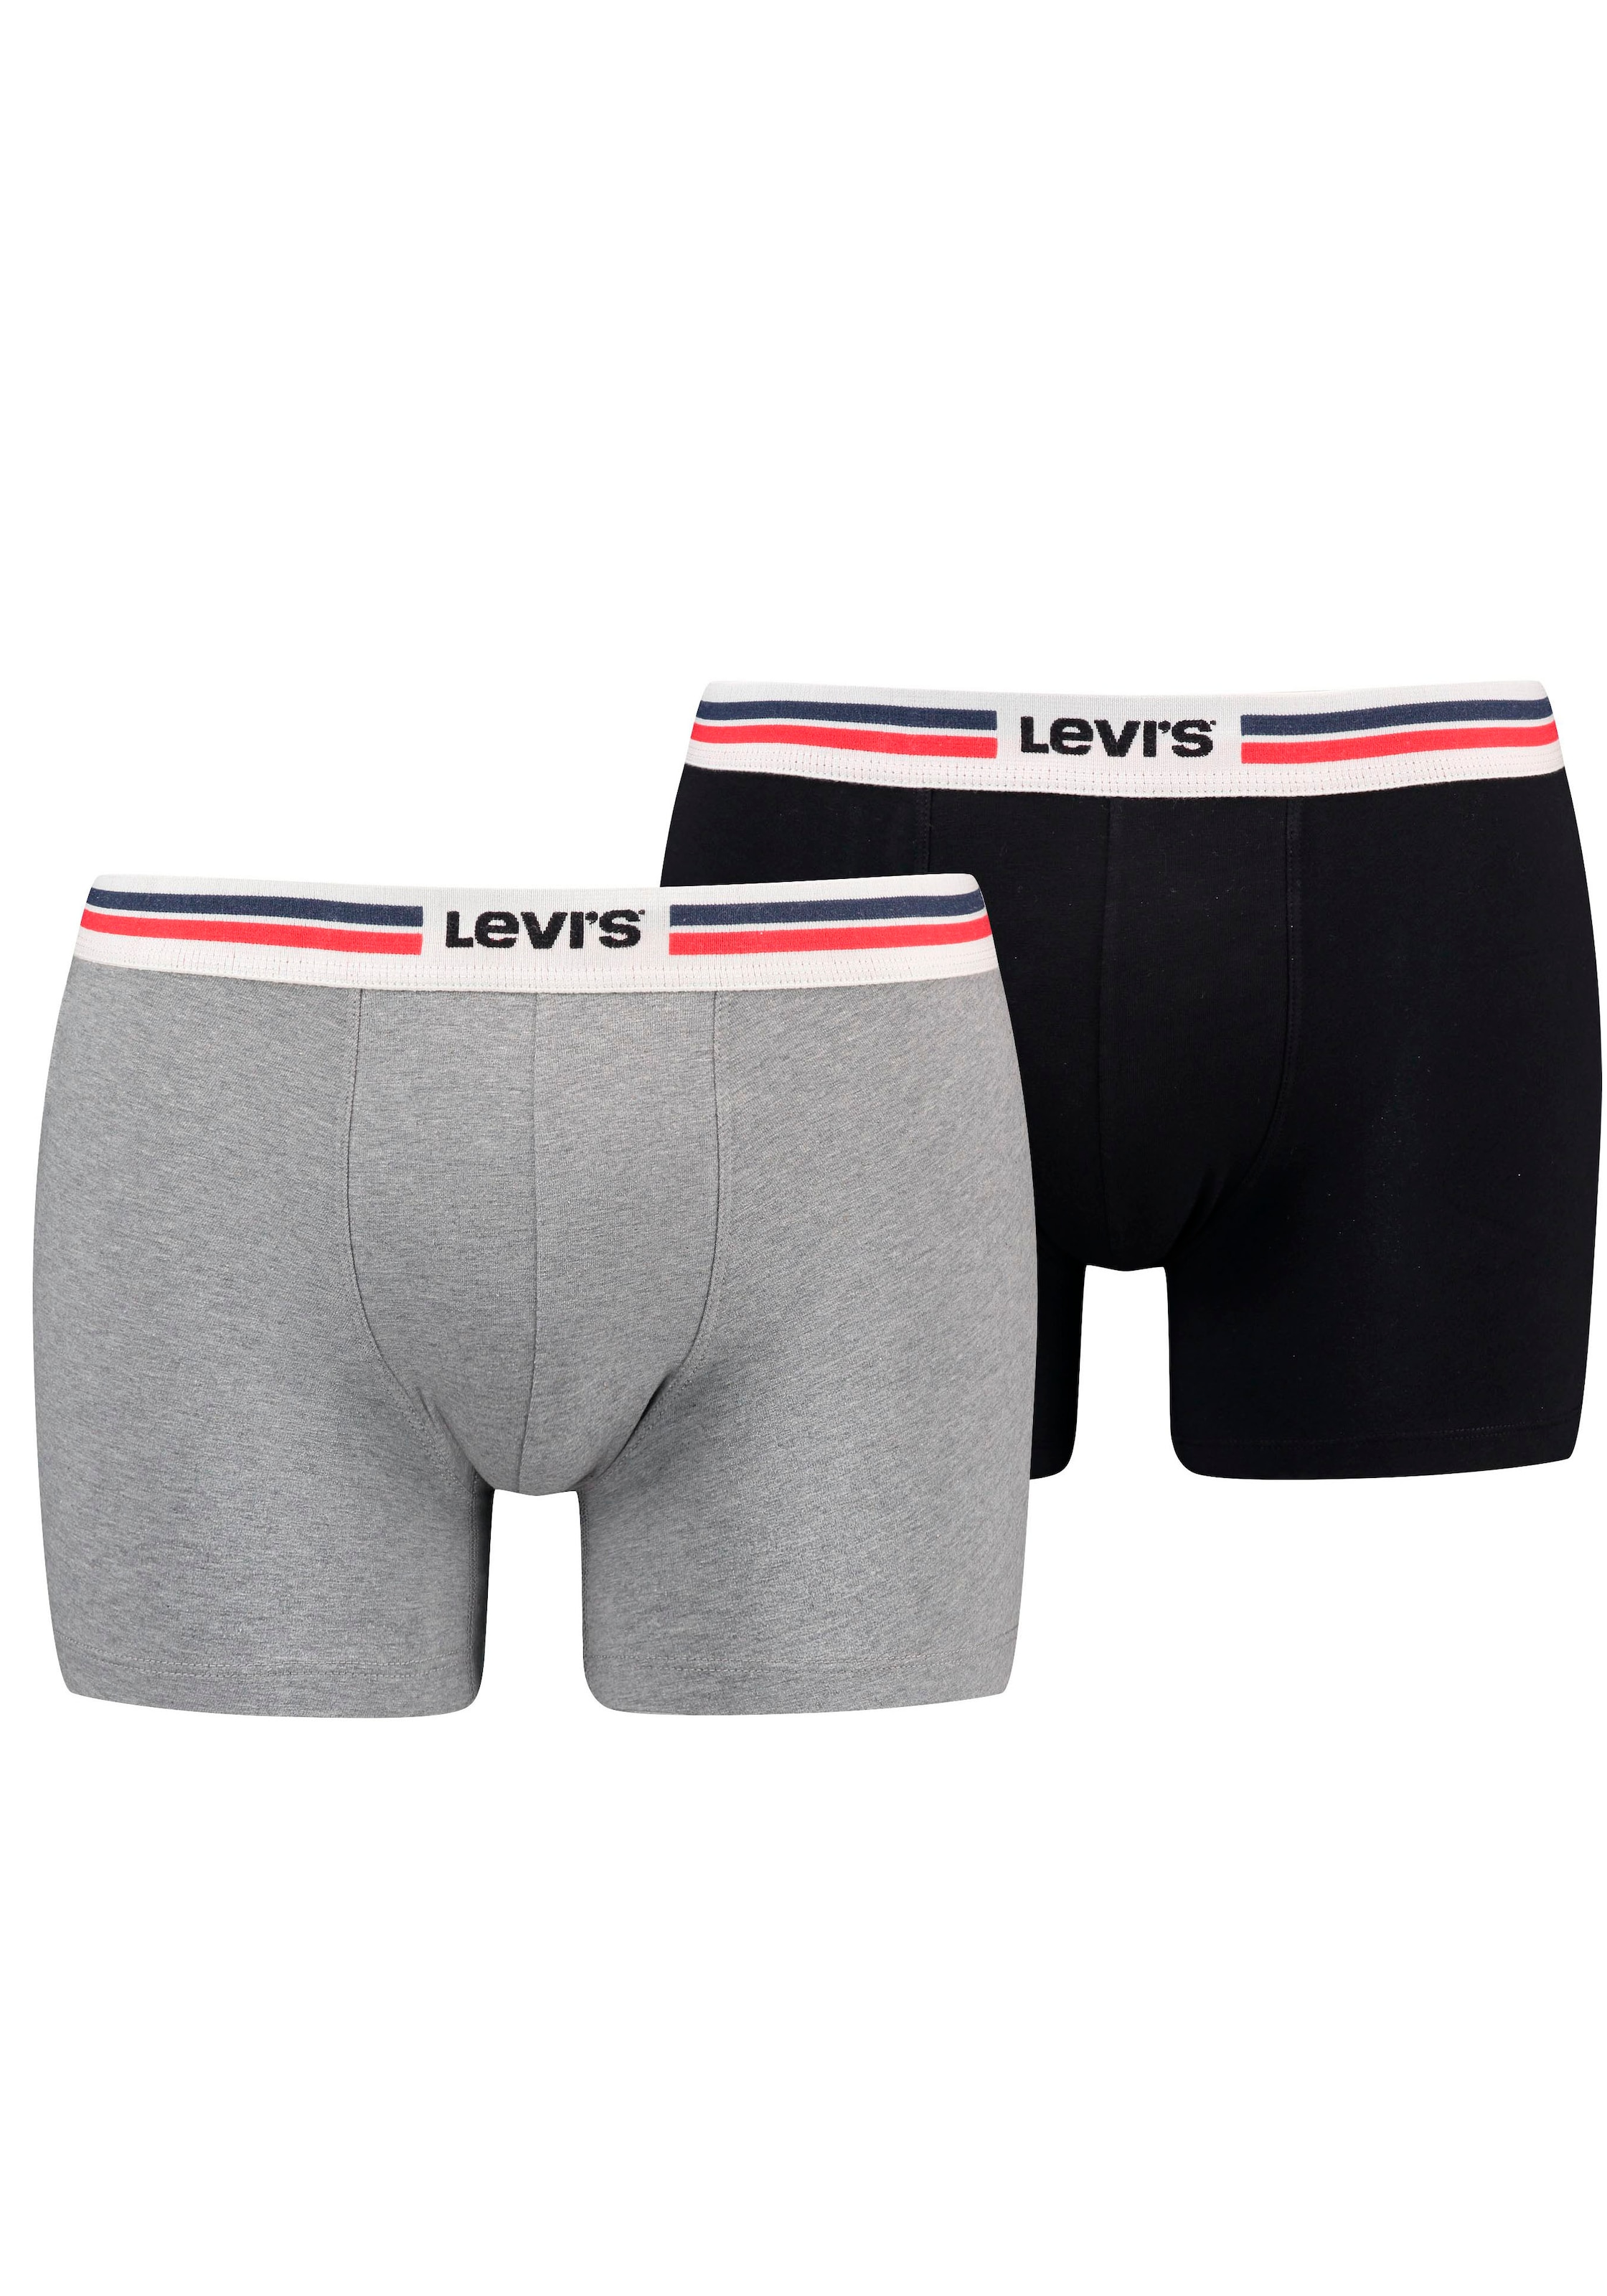 Boxershorts, (Packung, 2 St.), LEVIS MEN PLACED SPRTSWR LOGO BOXER BRIEF ORG 2P